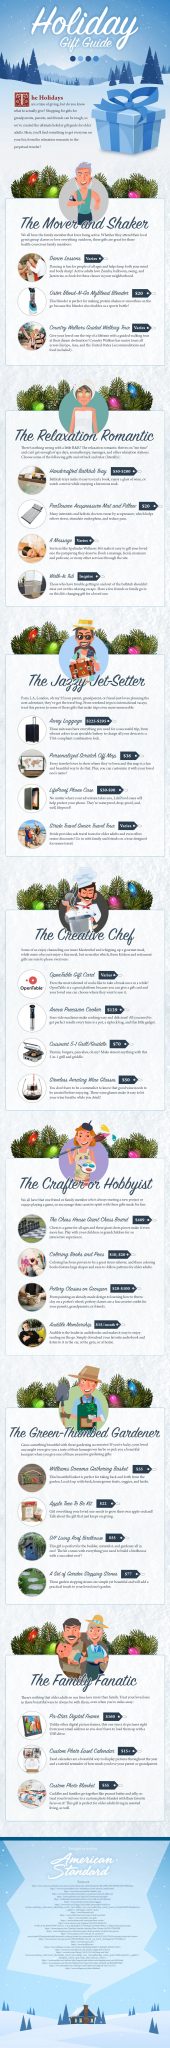 Holiday gift guide infographic